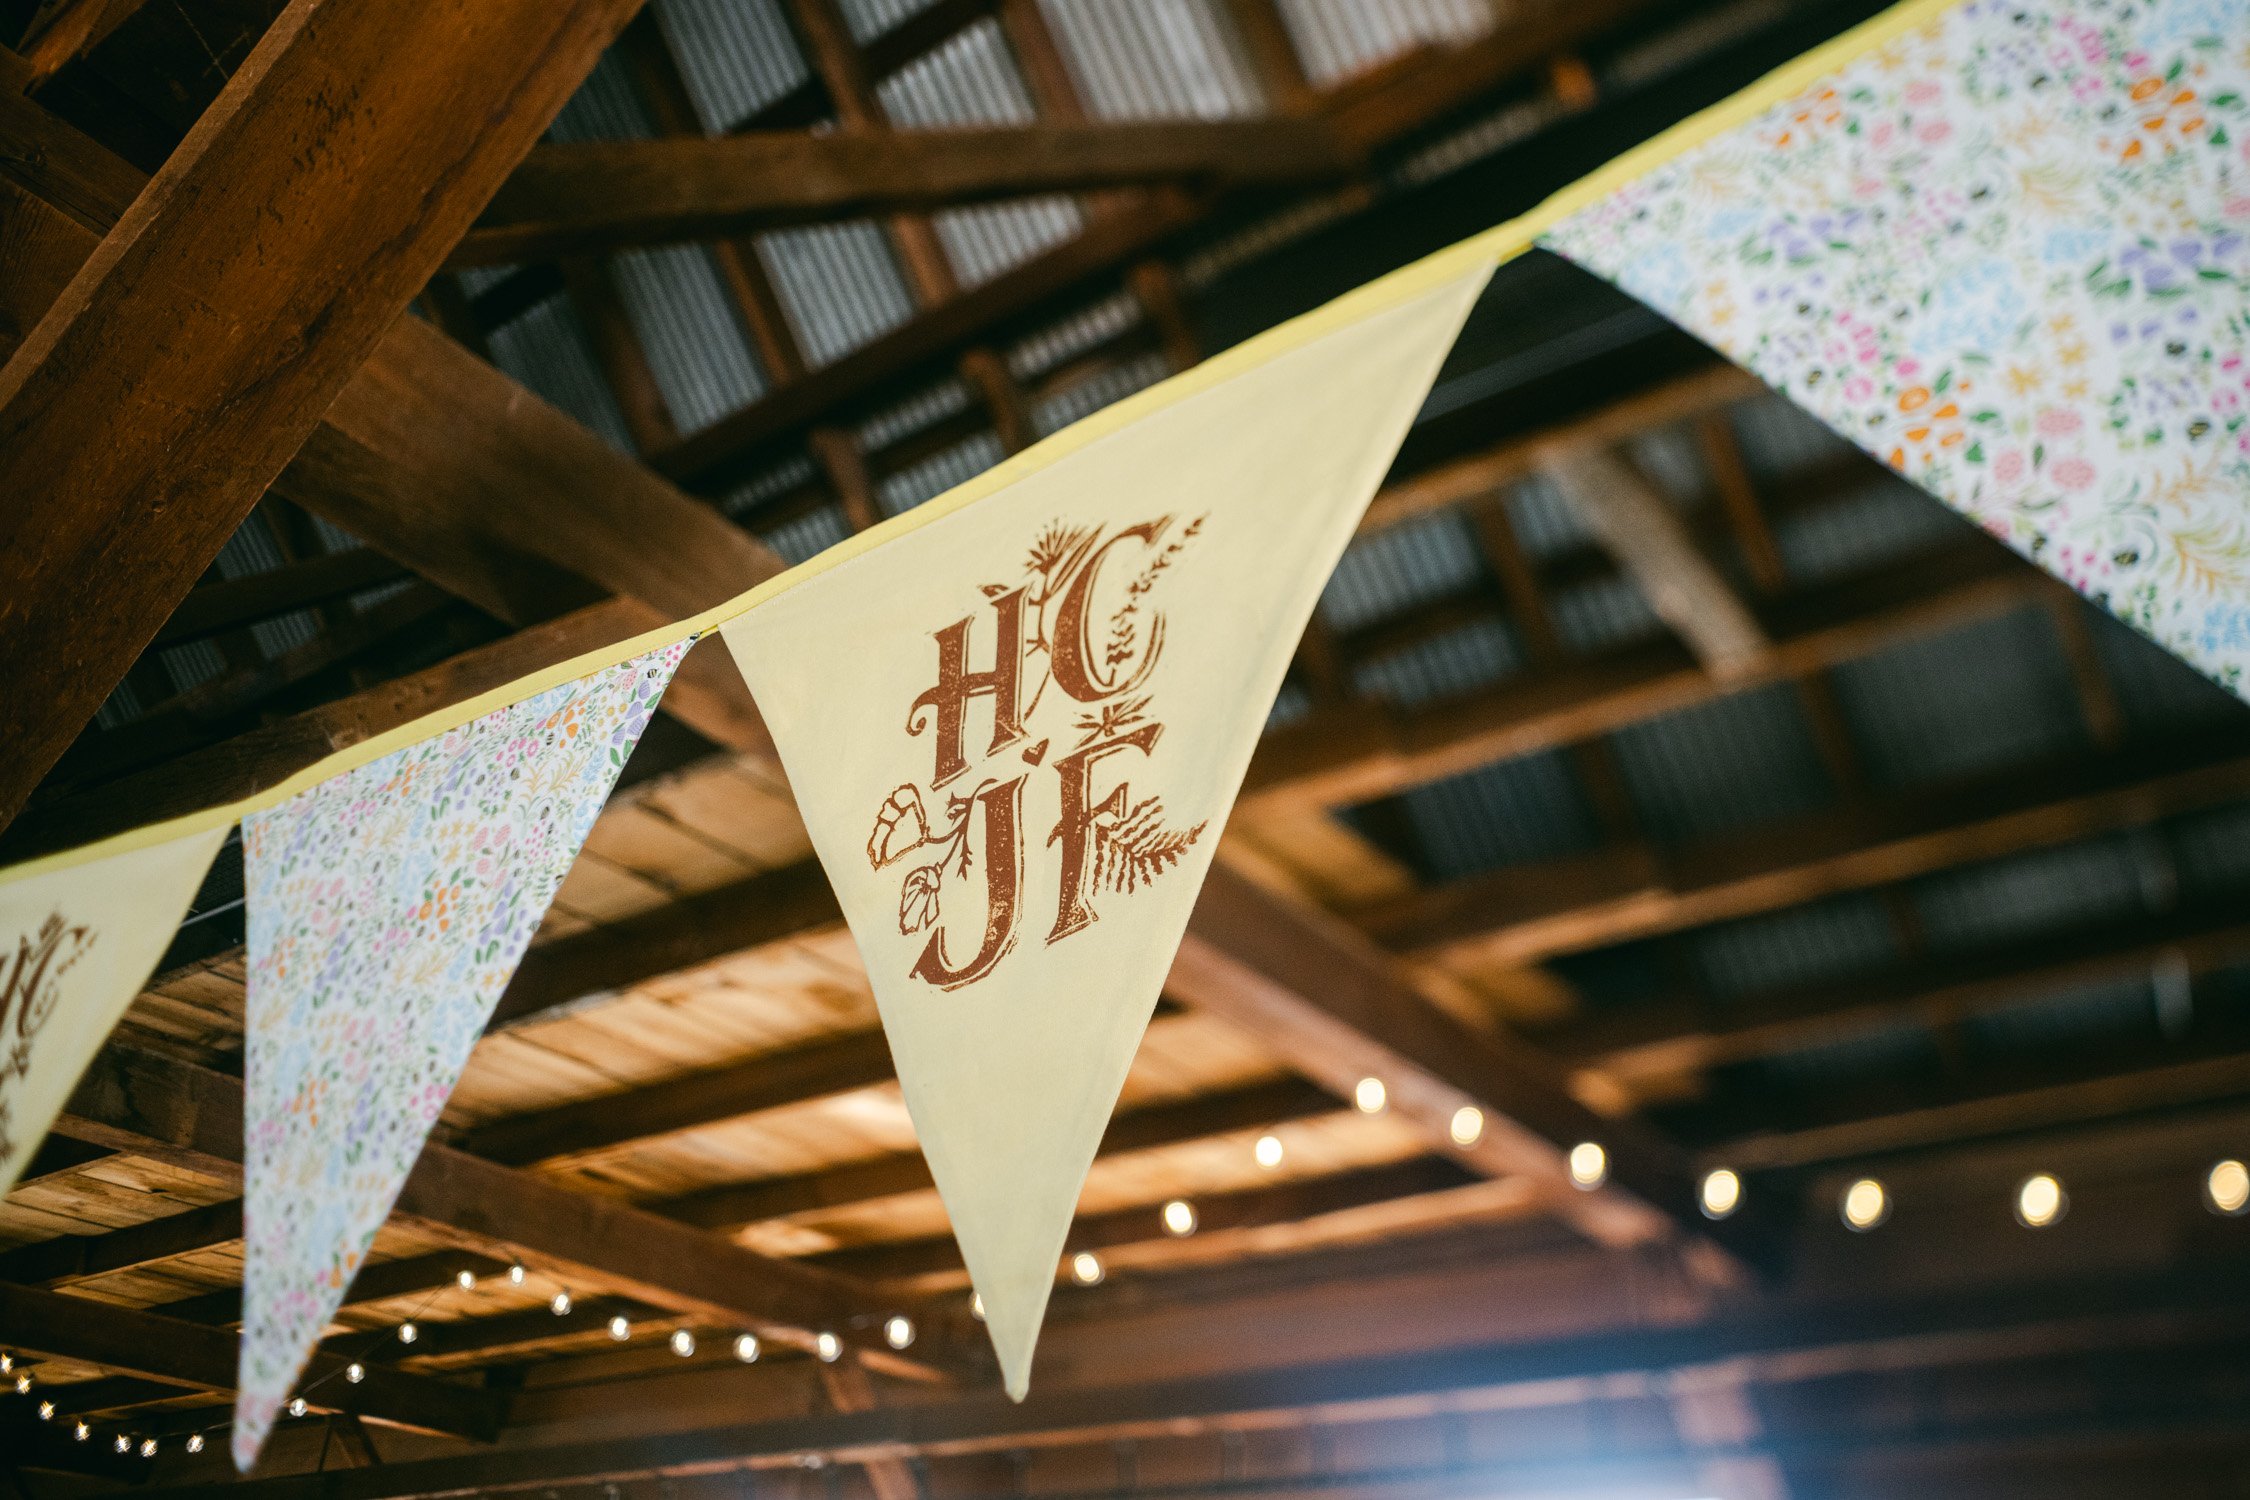 graeagle corner barn wedding, photo of the wedding banner with the couple's initials